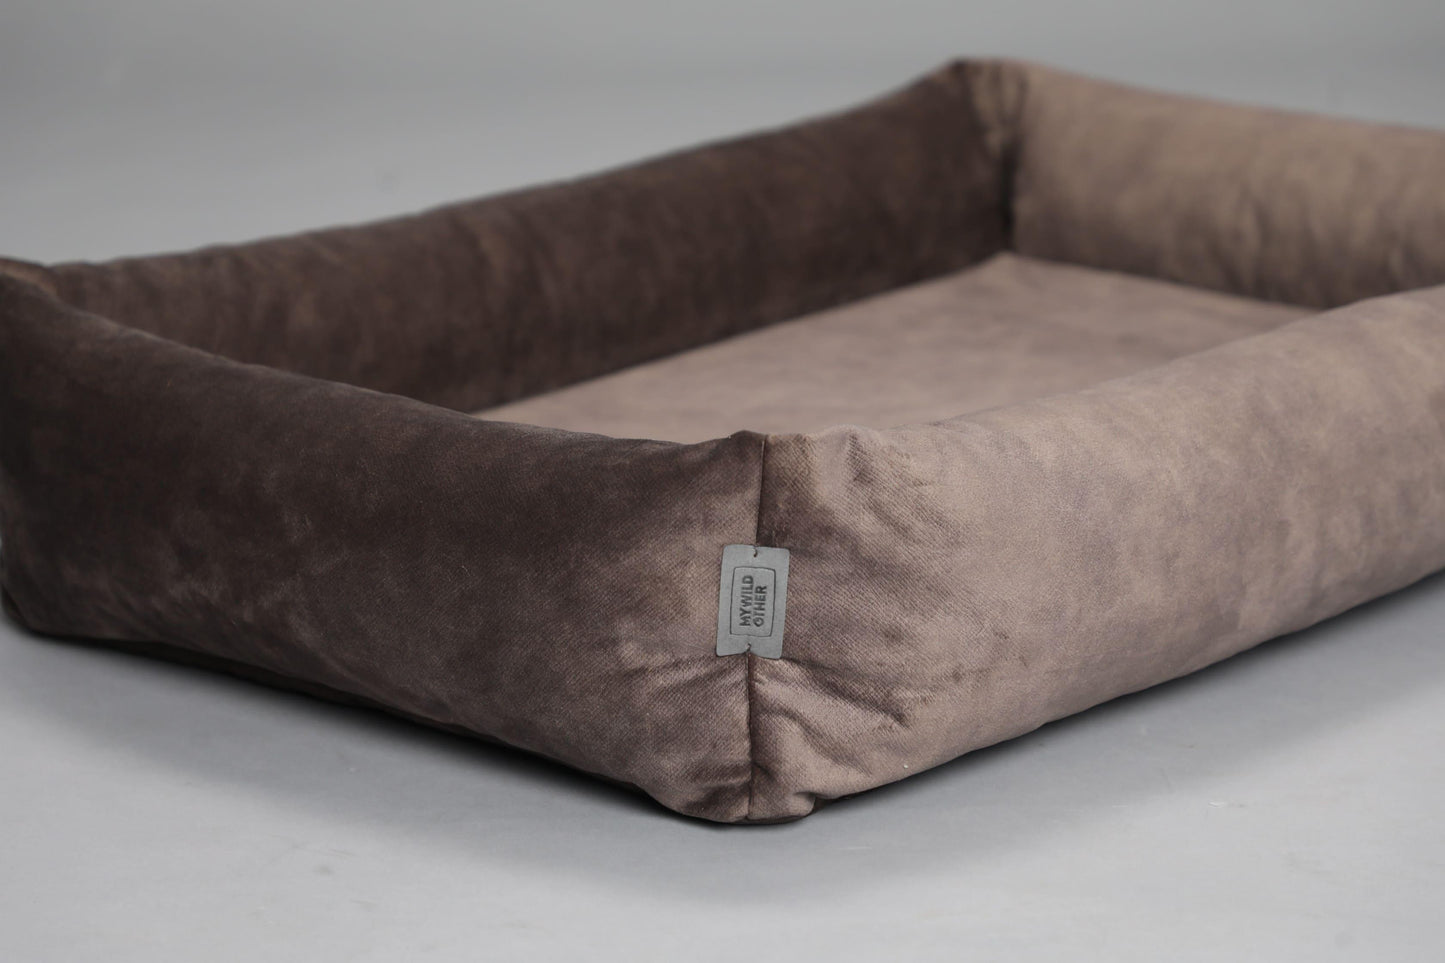 2-sided classic dog bed. TAUPE - handmade in Lithuania by My Wild Other